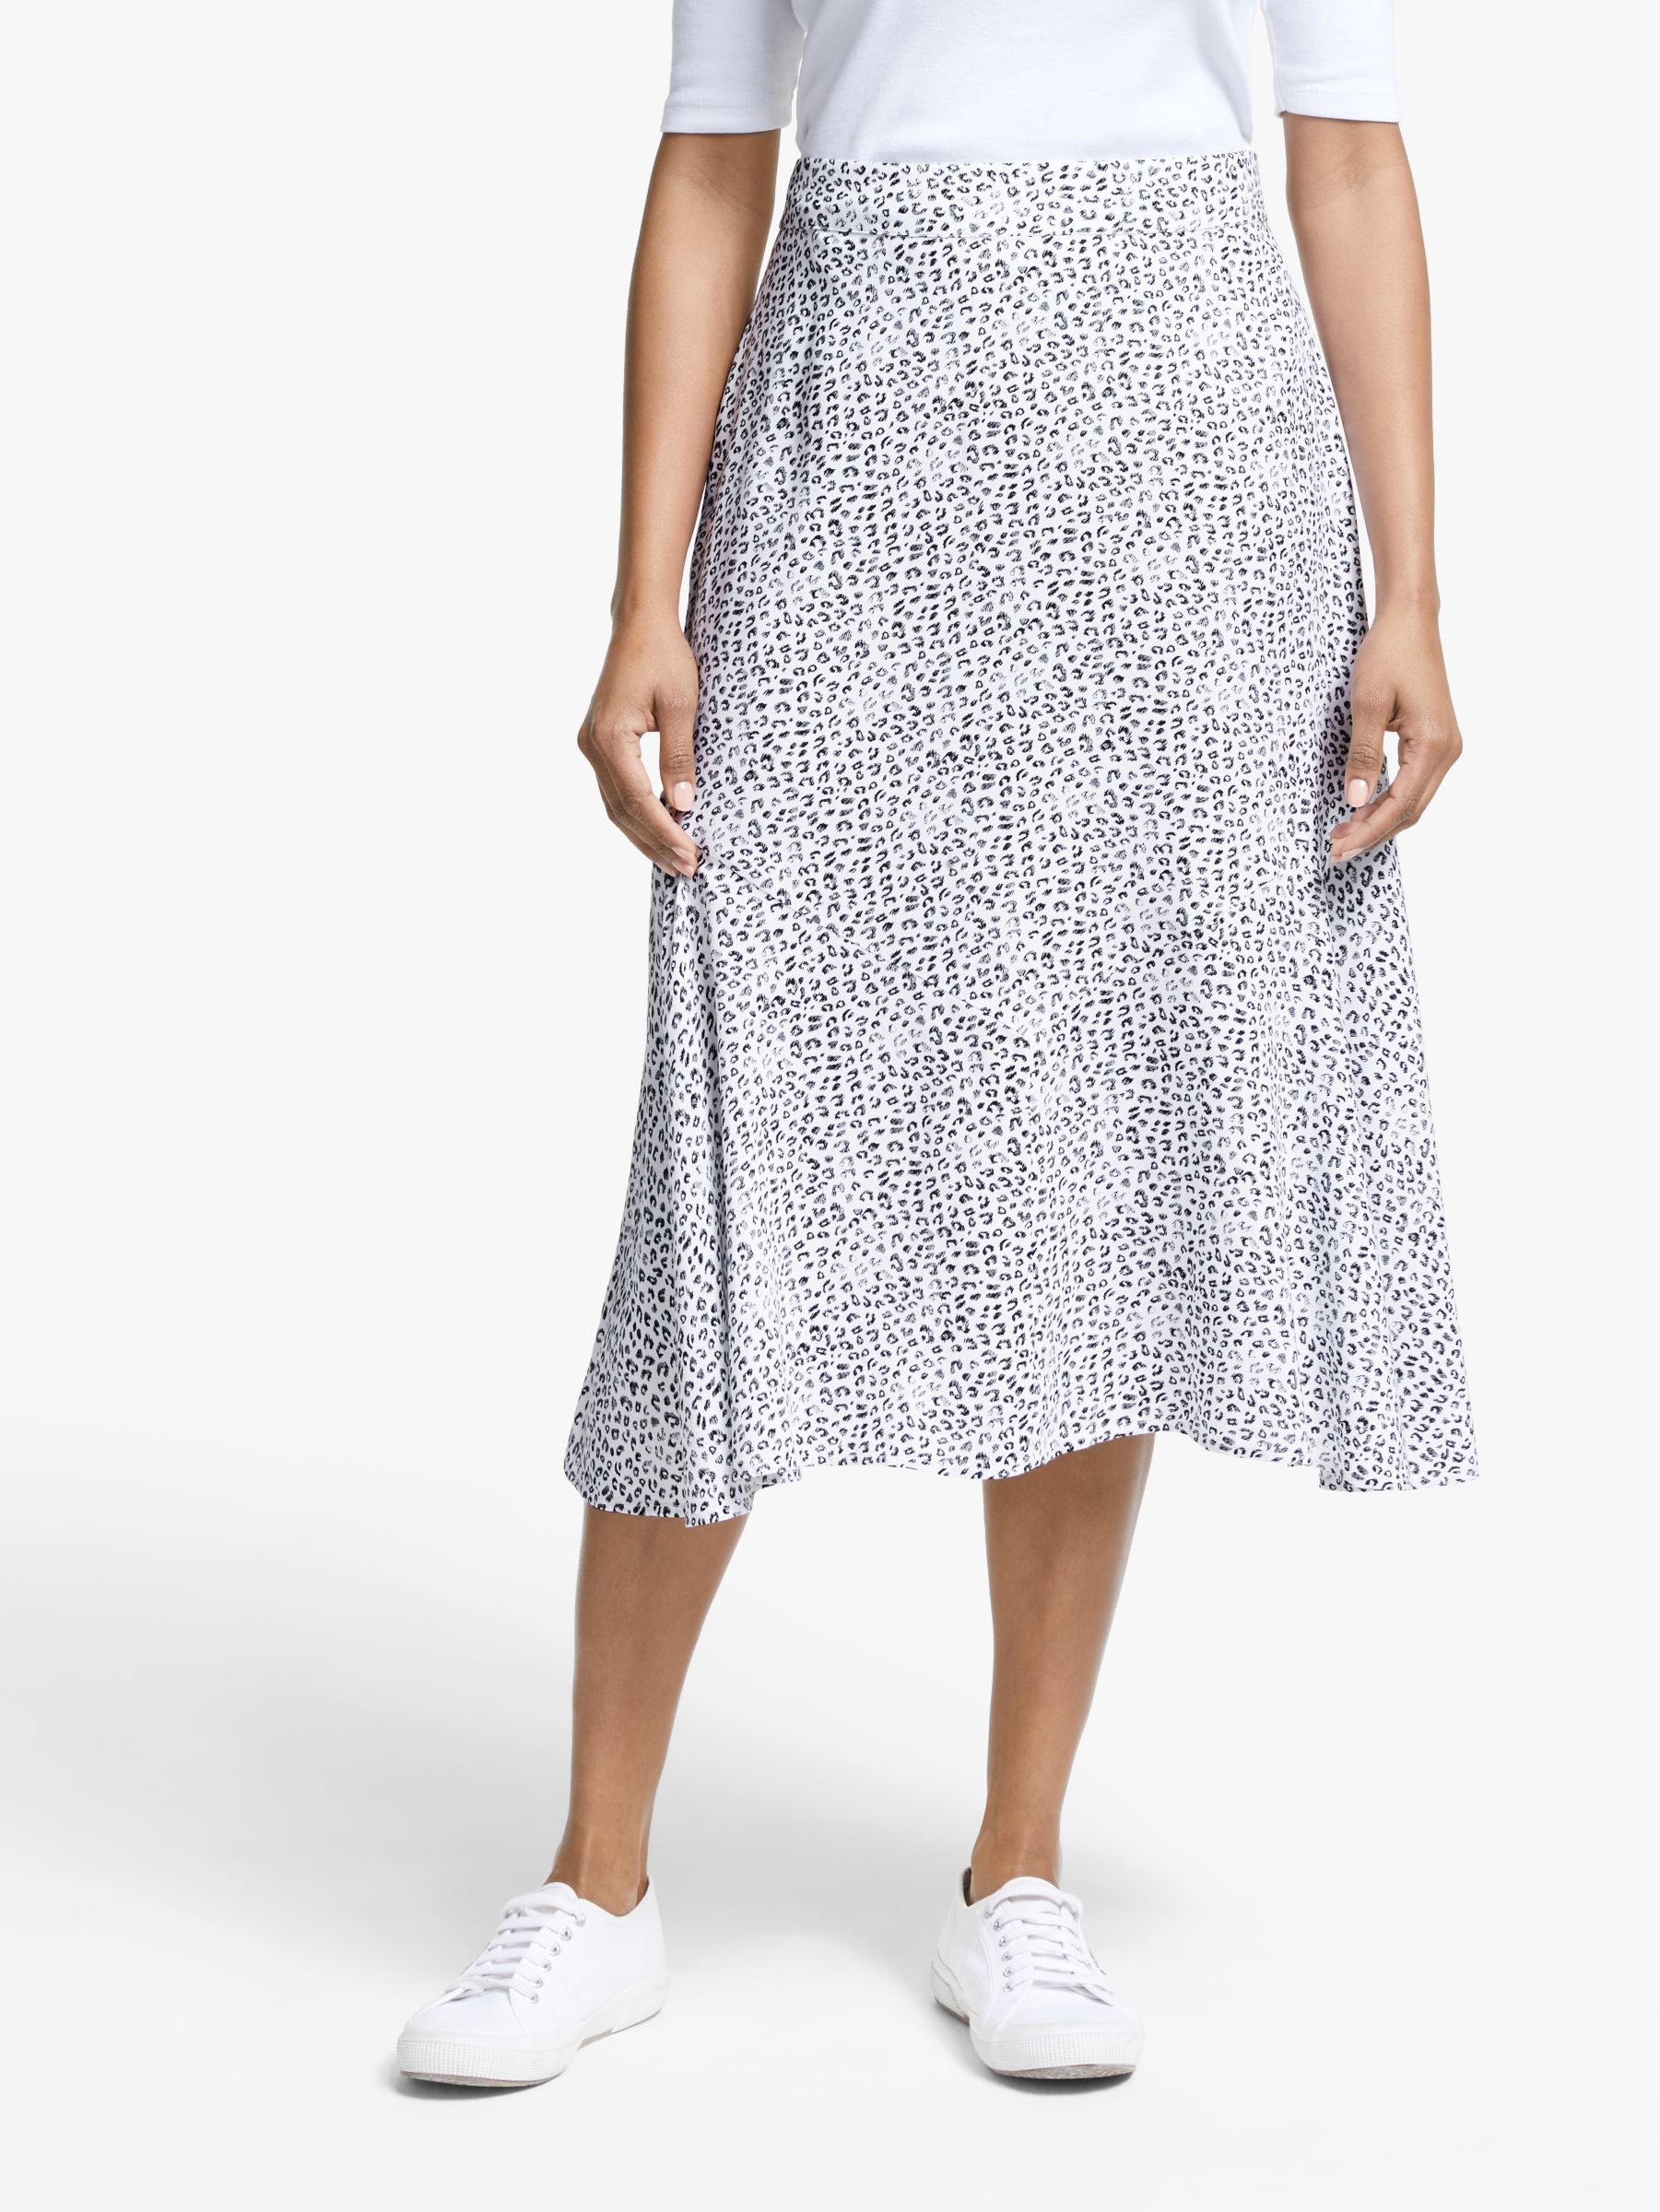 Collection WEEKEND by John Lewis Leopard Print Midi Skirt, White/Black